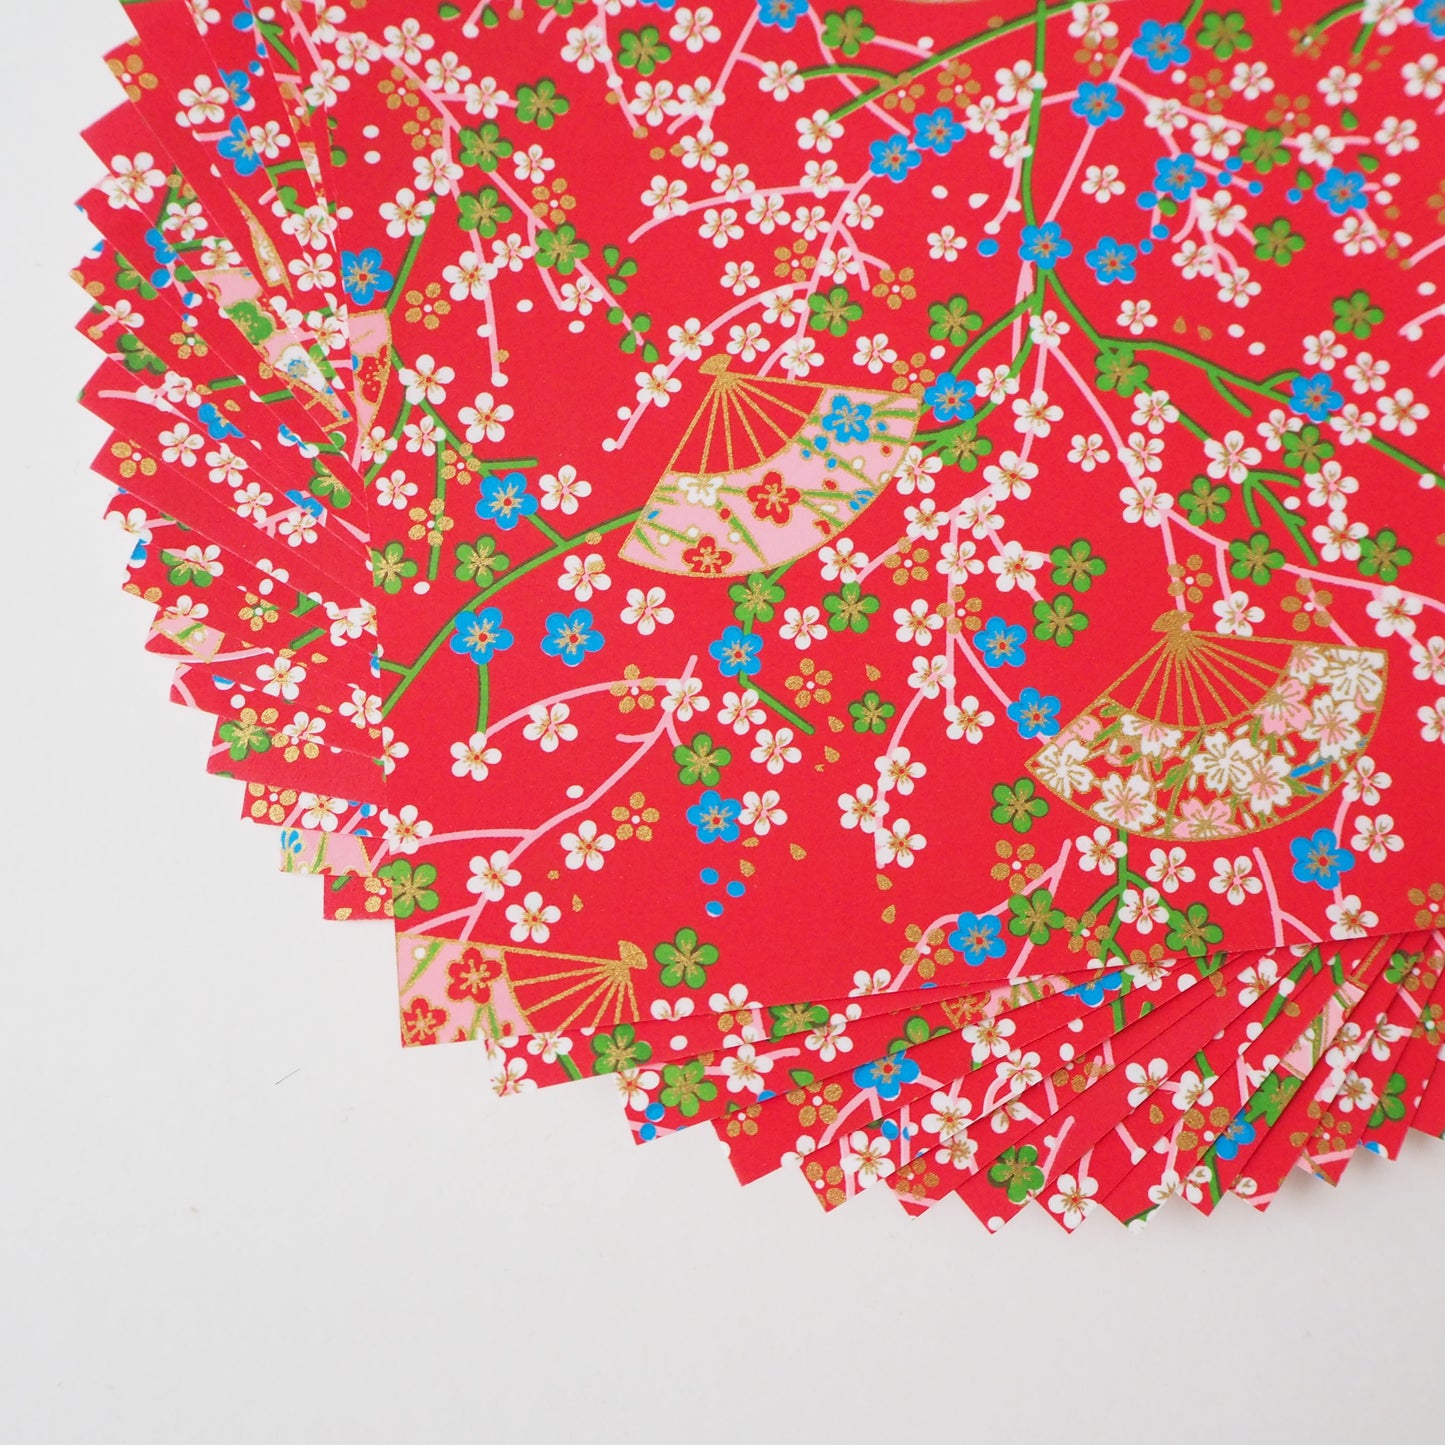 Pack of 20 Sheets 14x14cm Yuzen Washi Origami Paper HZ-263 - Small Plum Flowers & Fans Red